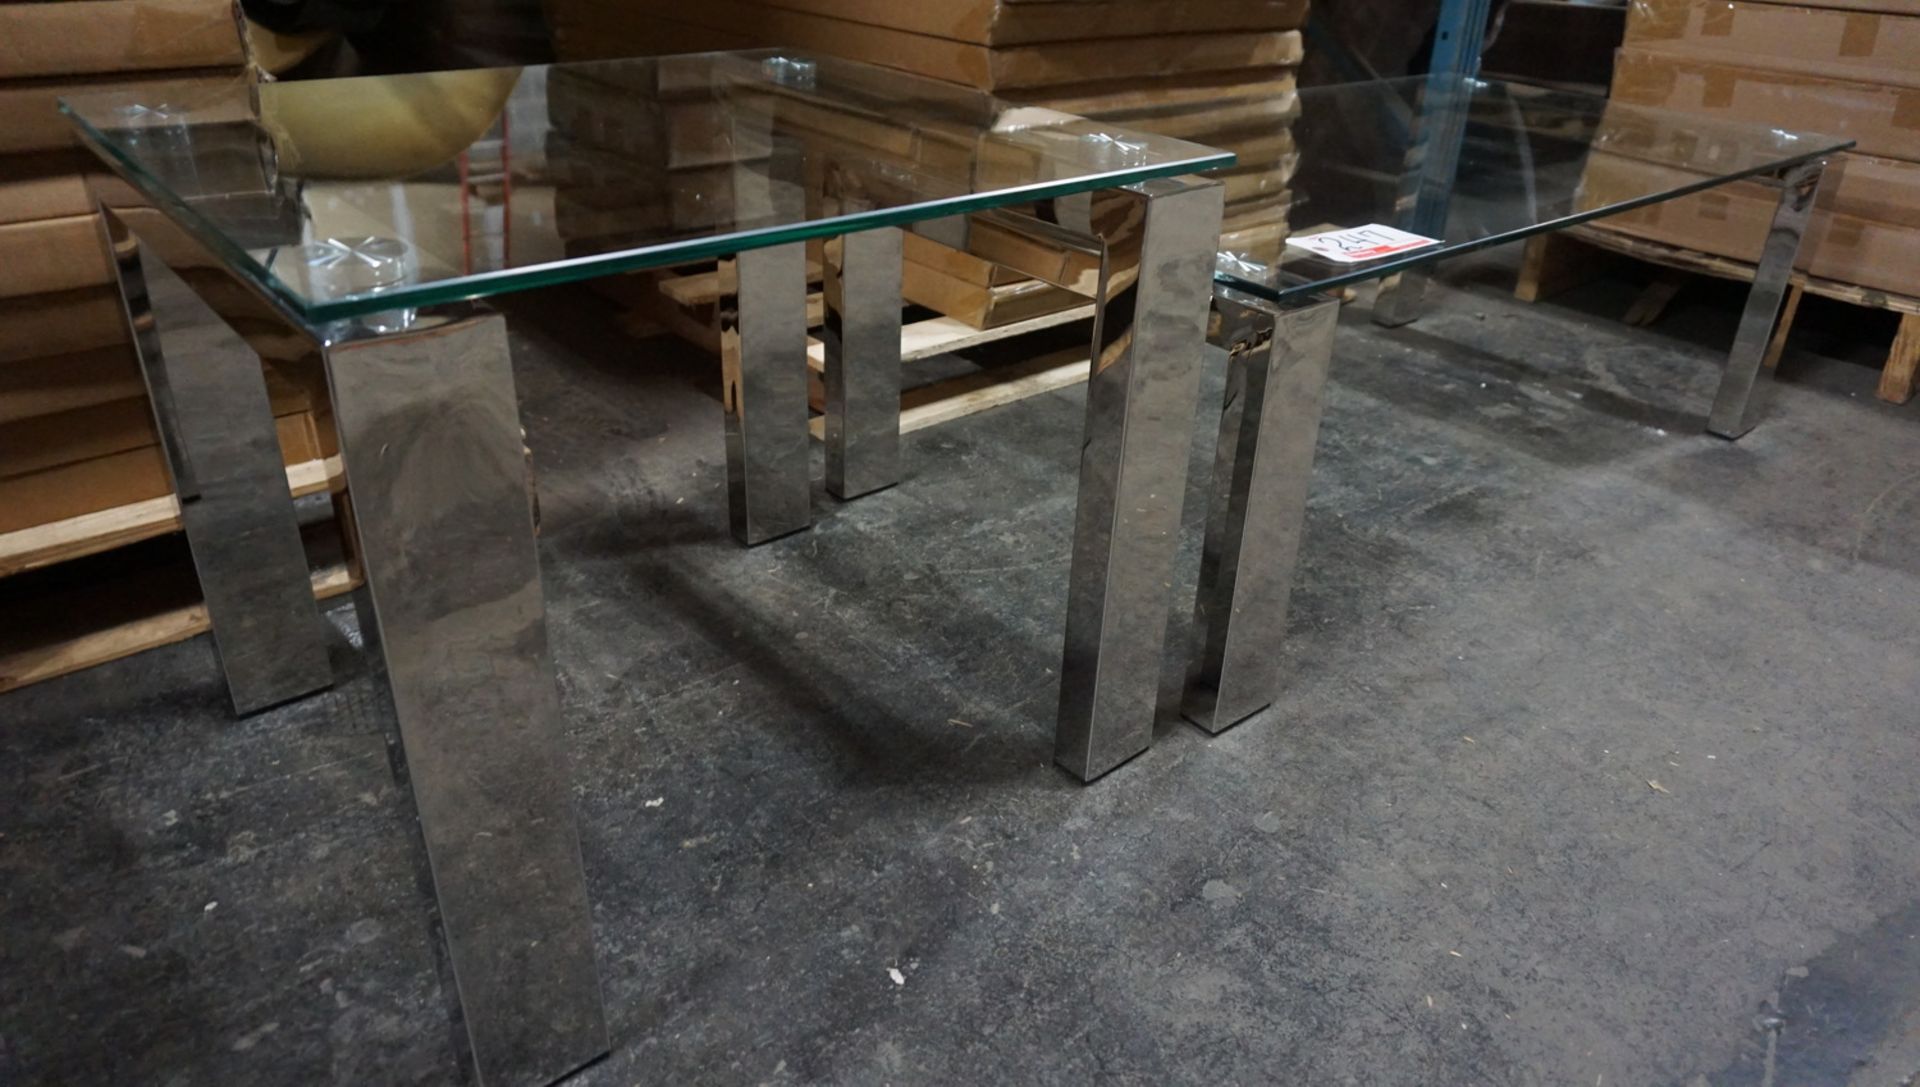 SET - STAINLESS FRAME W/ CLEAR GLASS COFFEE / SIDE TABLE - 48" X 24" X 16" & 23.5" X 21.5" X 20" ( - Image 2 of 2